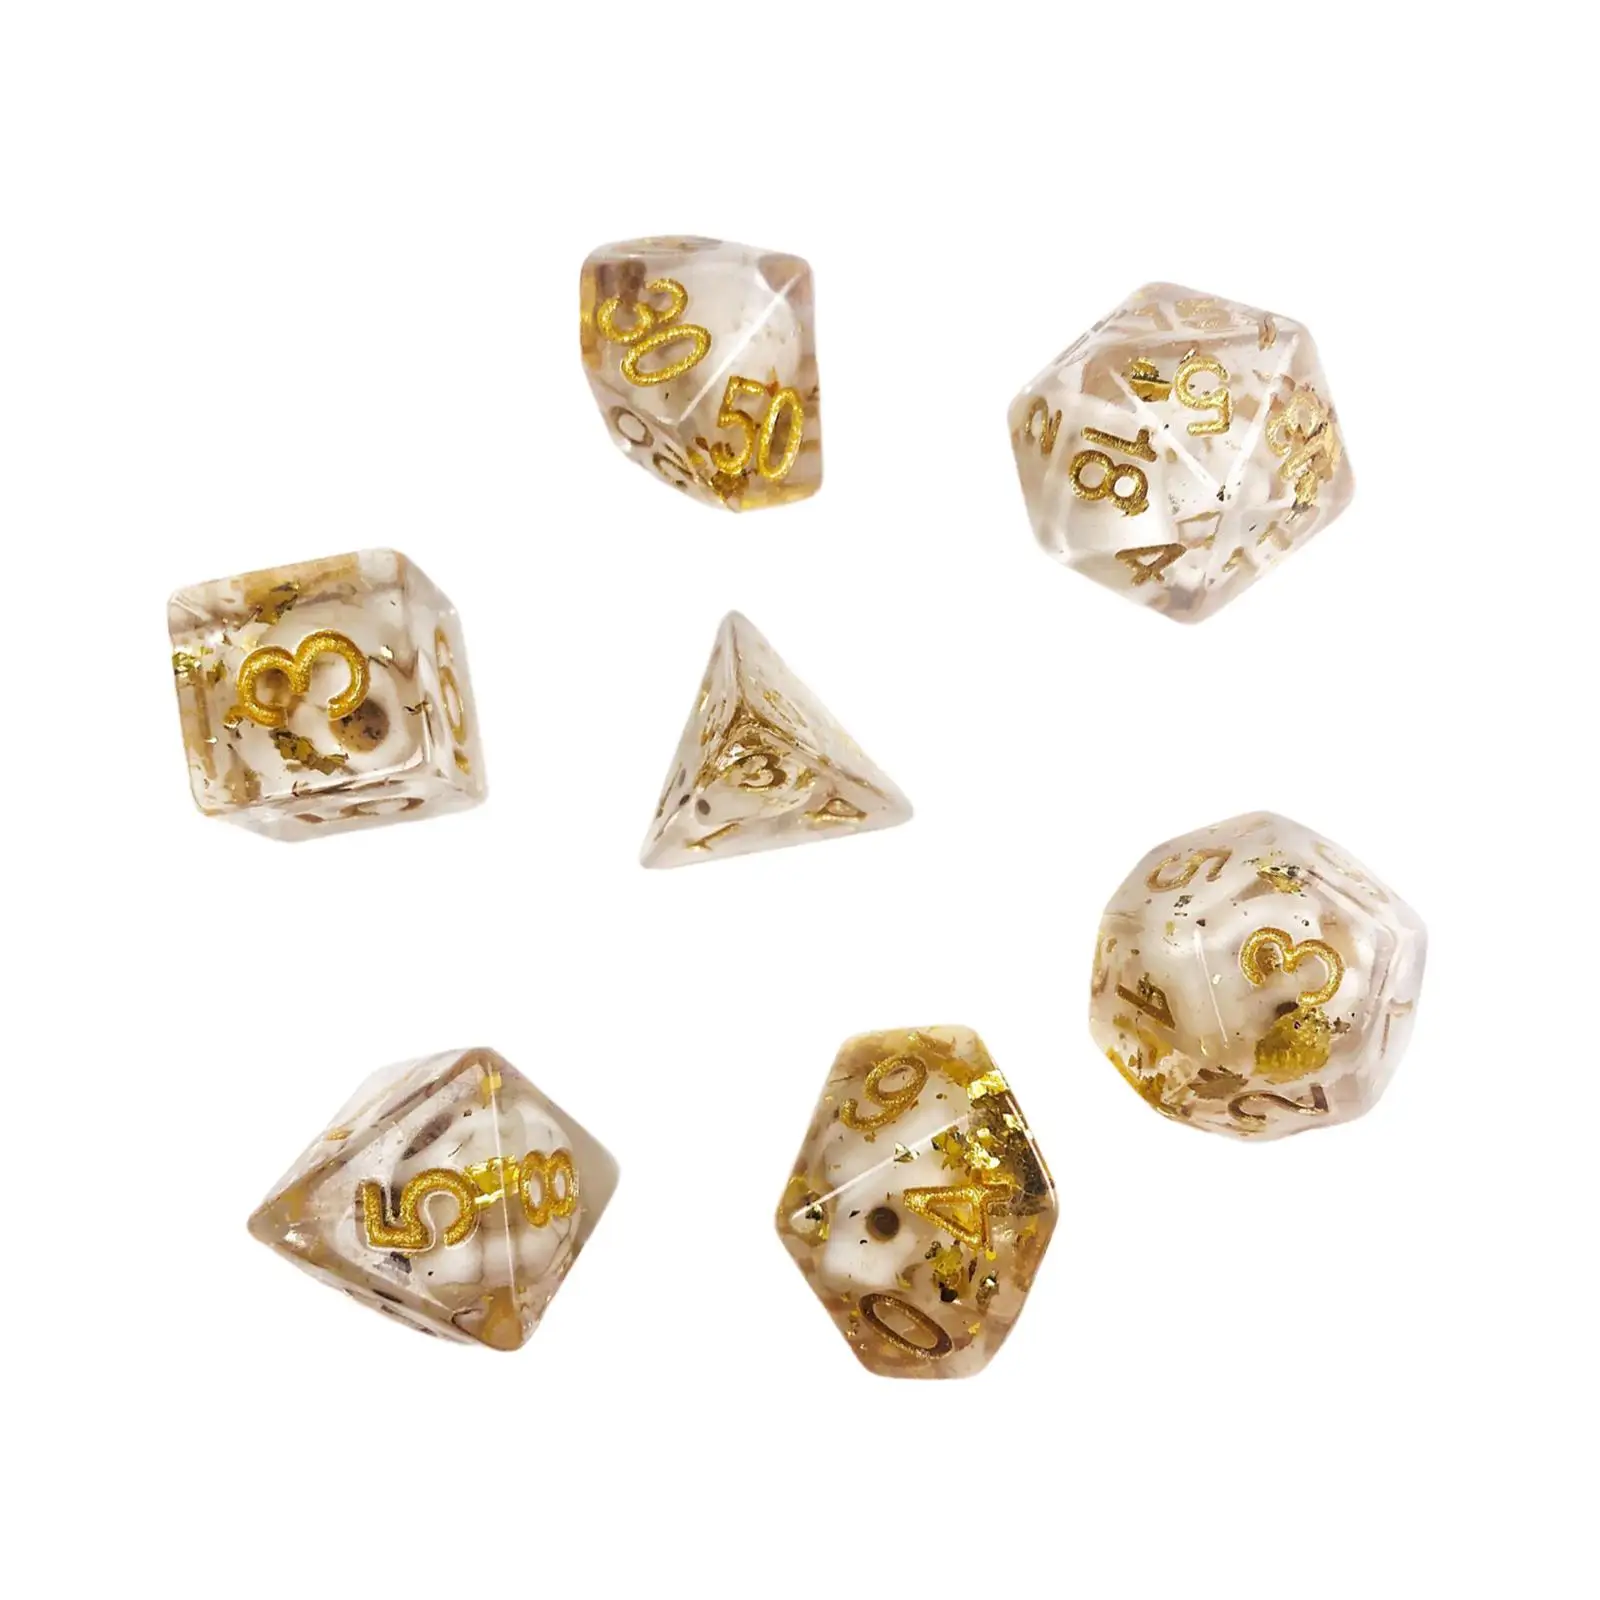 7 Pieces Polyhedral Dicess Set Built in Skull for Tabletop Game Math Game Role Play